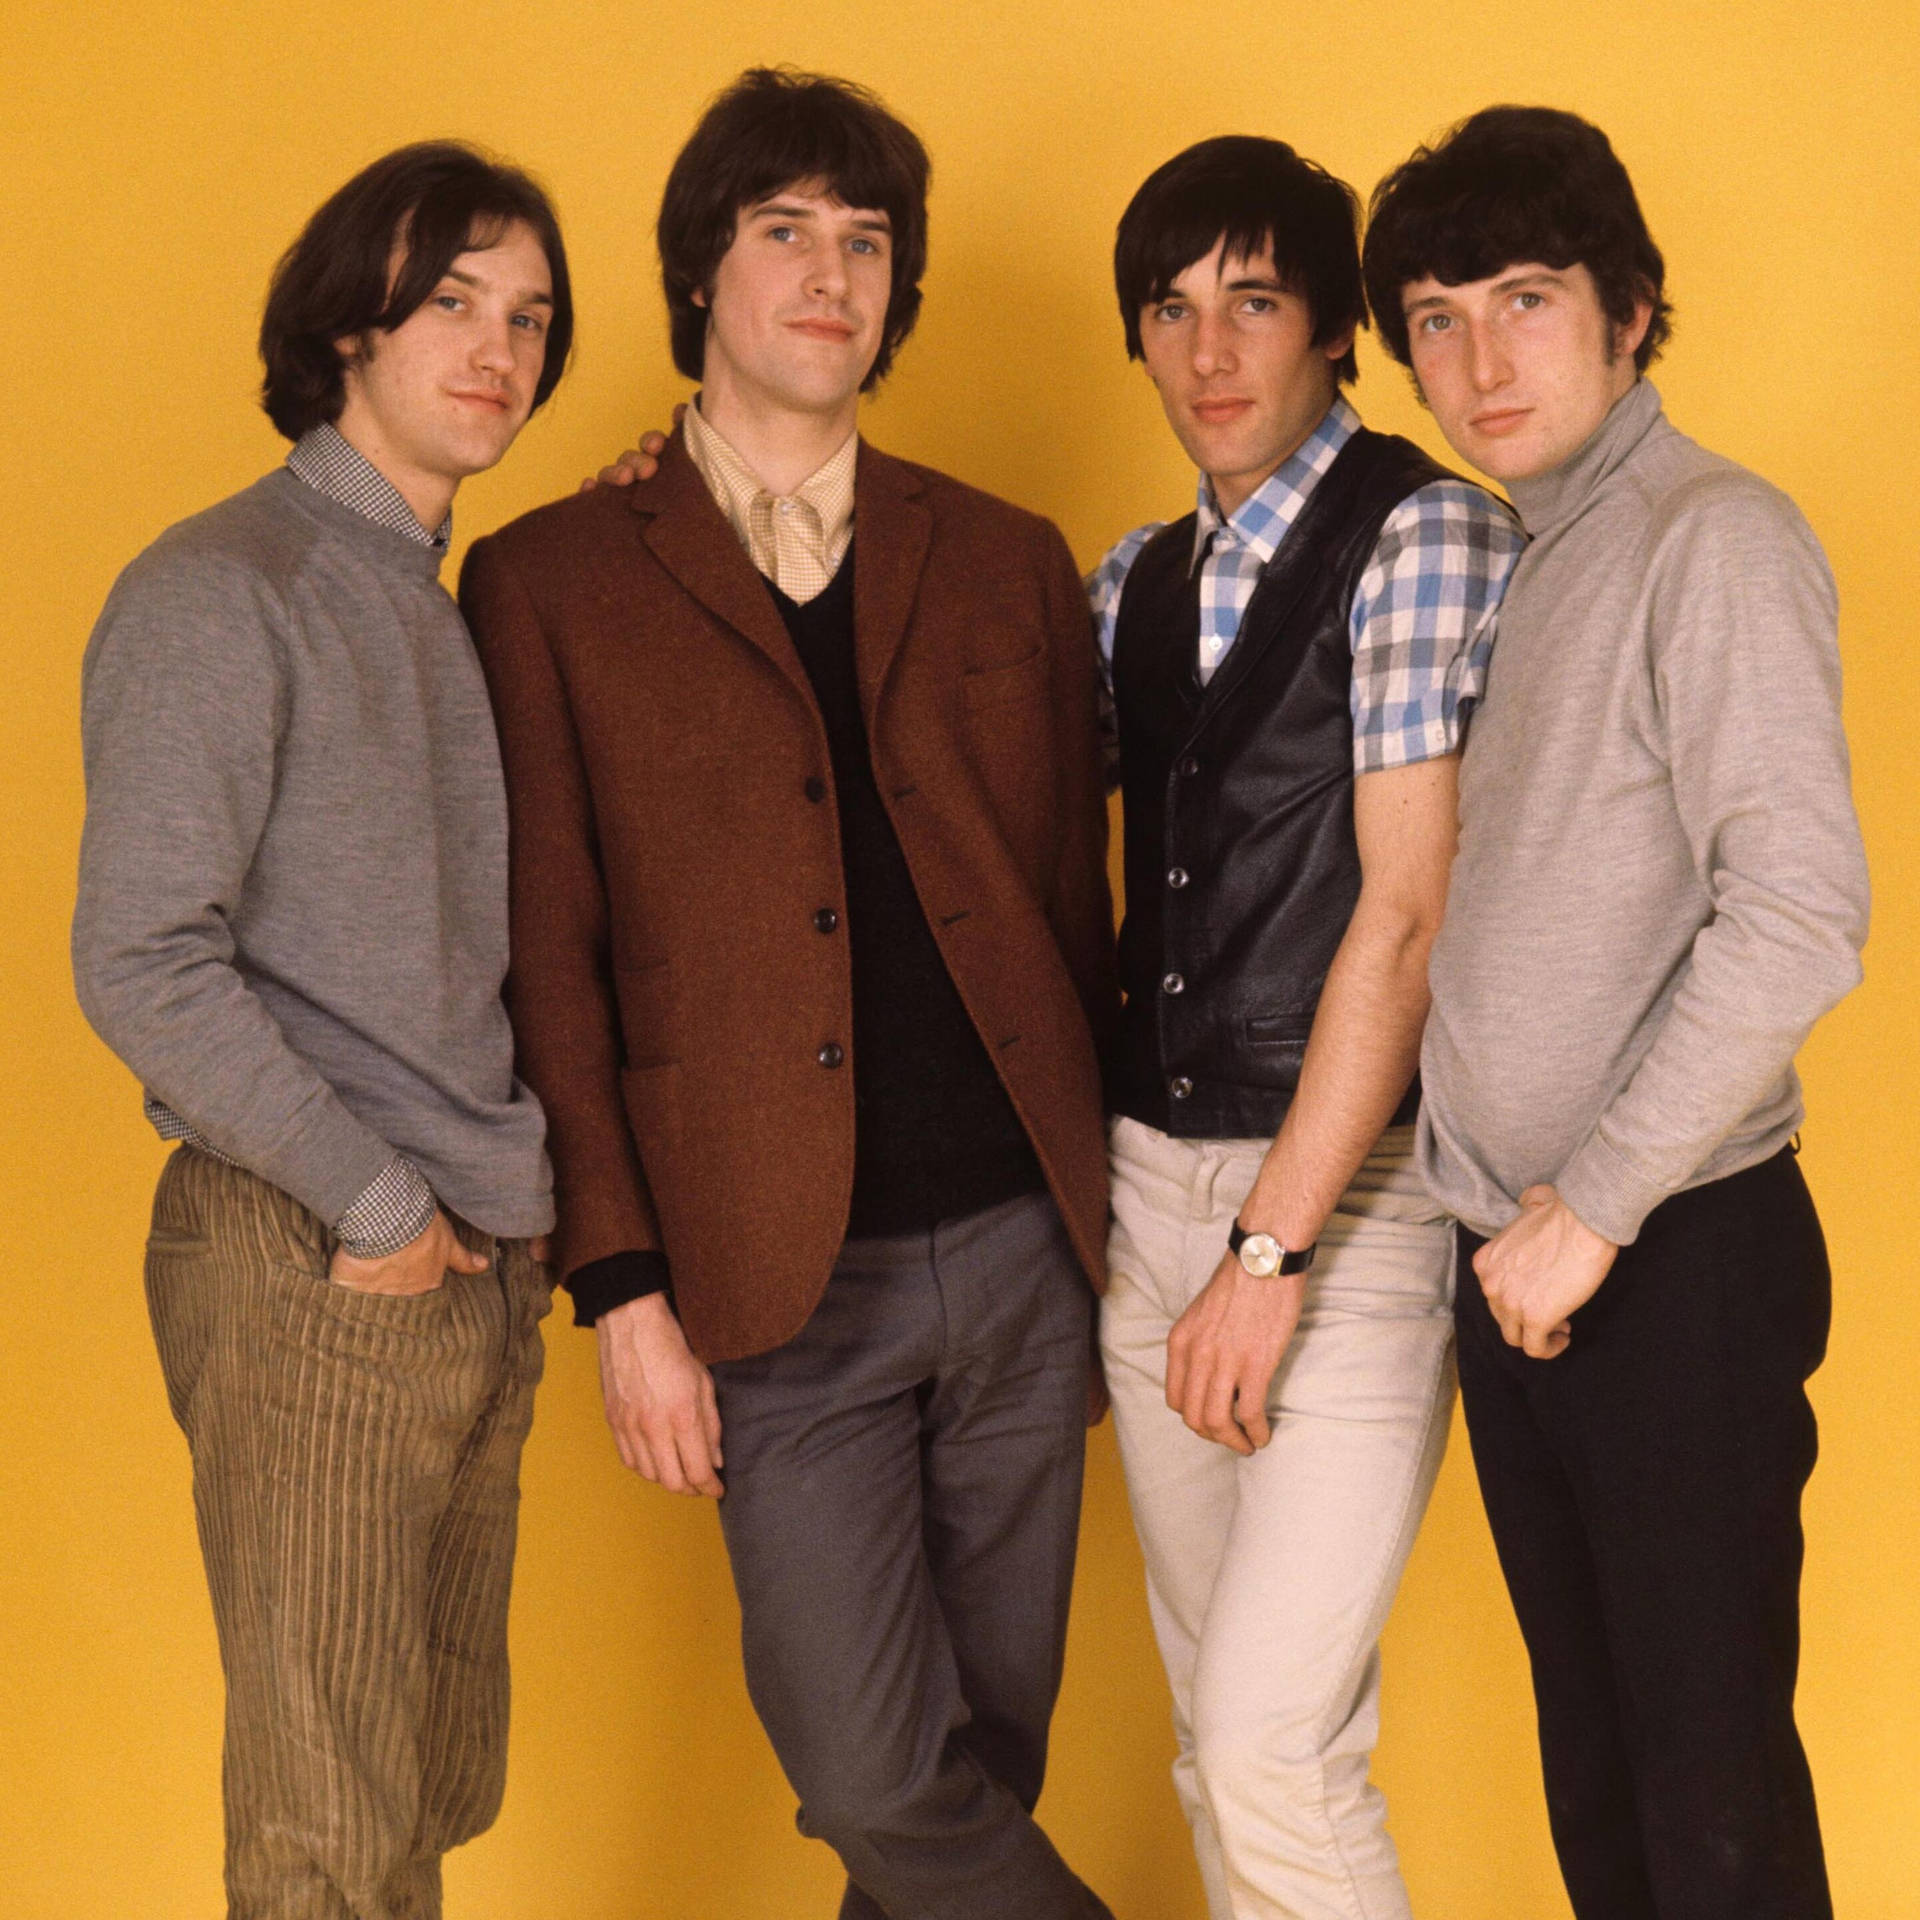 Iconic Photoshoot of The Legendary Band, 'The Kinks' Wallpaper